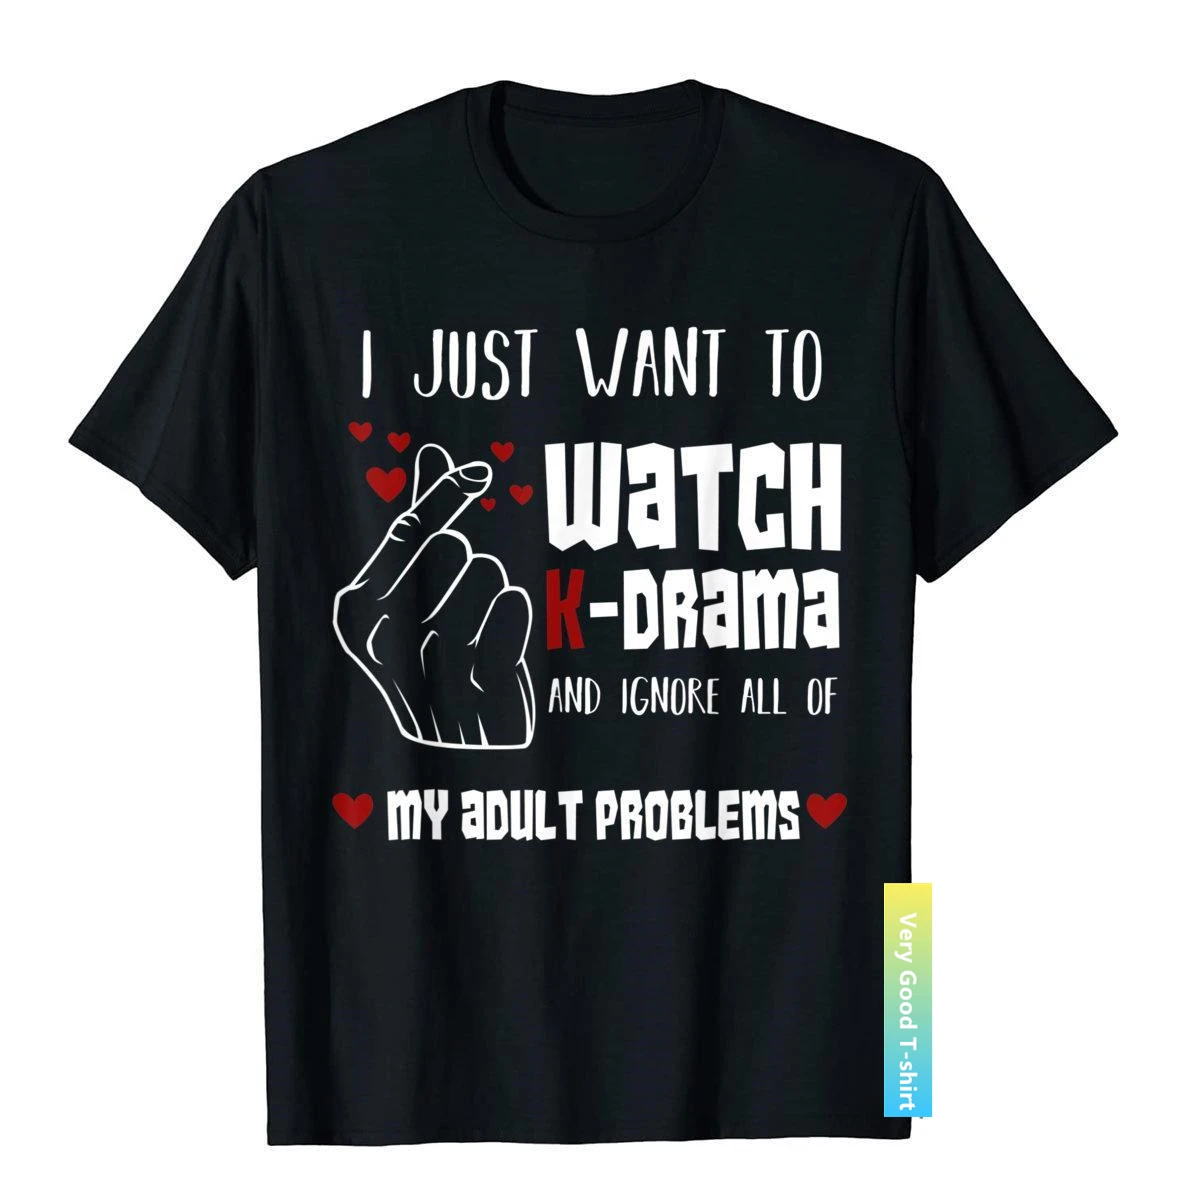 

I Just Want To Watch K-Drama Funny Korea Lover T-Shirt T Shirts Tops Tees Prevailing Cotton Preppy Style Classic Mens